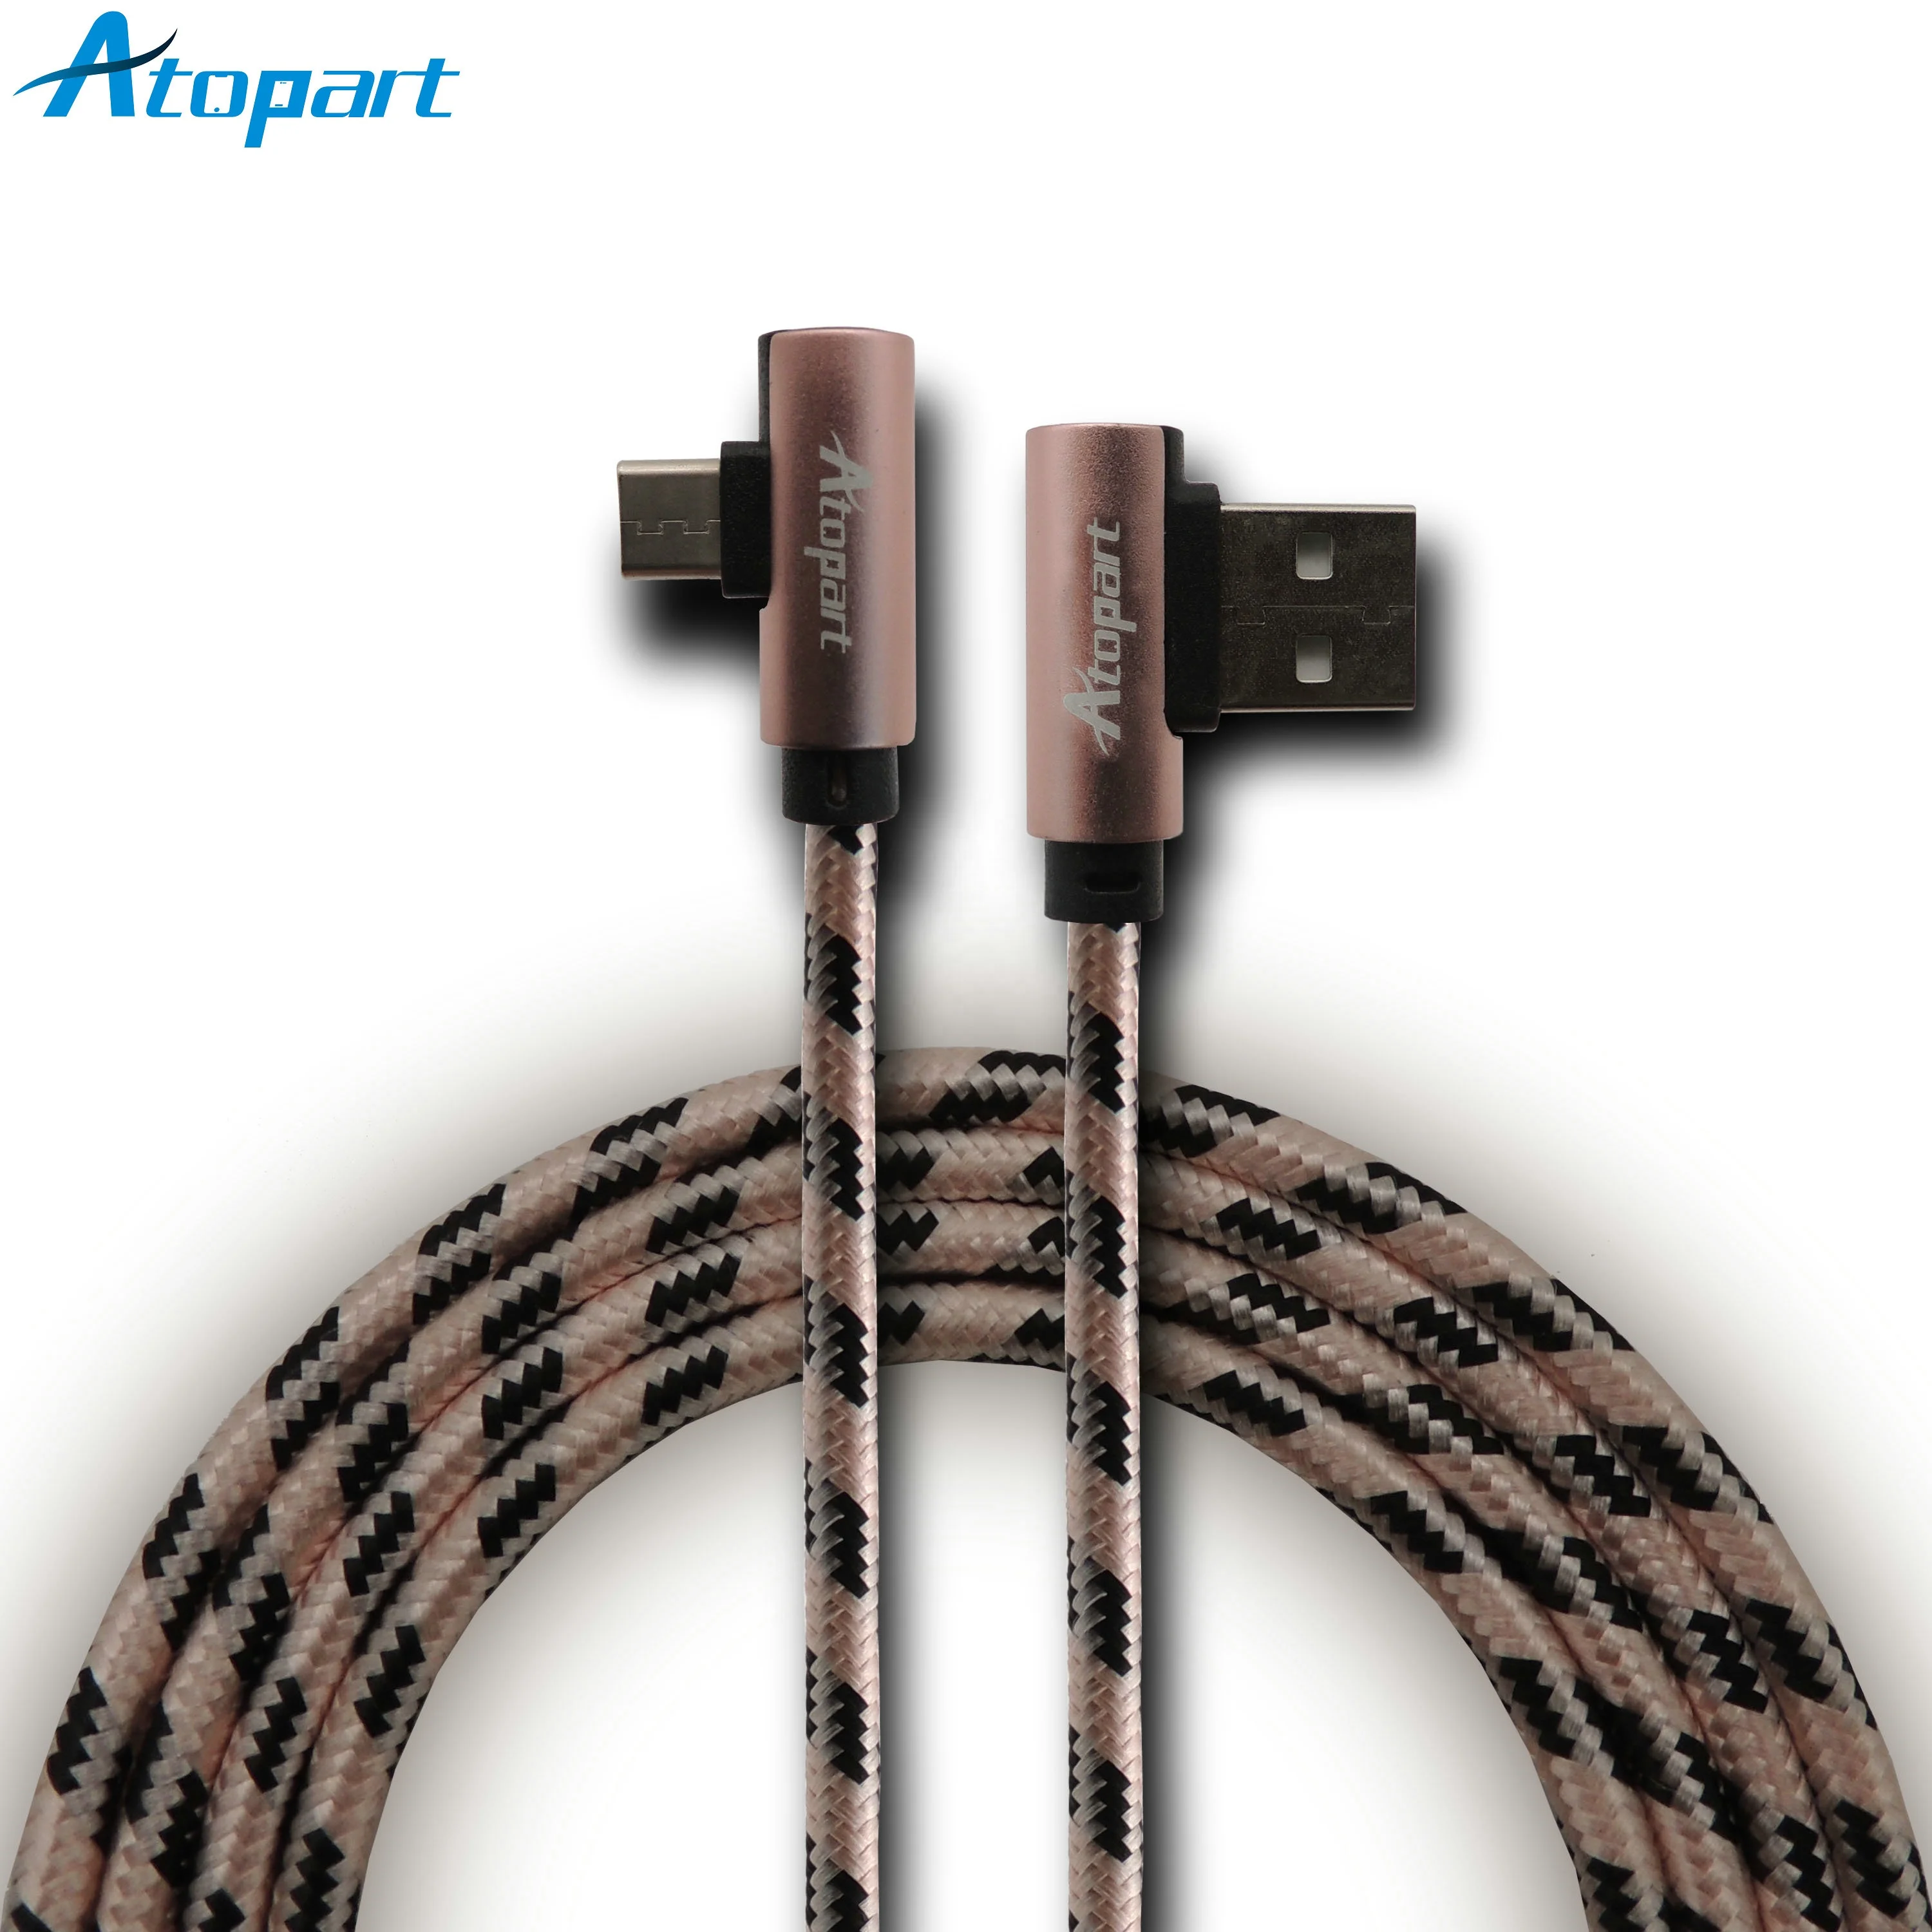 

Free shipping 1M T shape Nylon braided mobile phone cable usb type c fast charger charging data sync cable for lighting cable, Green,red,silver,rose gold